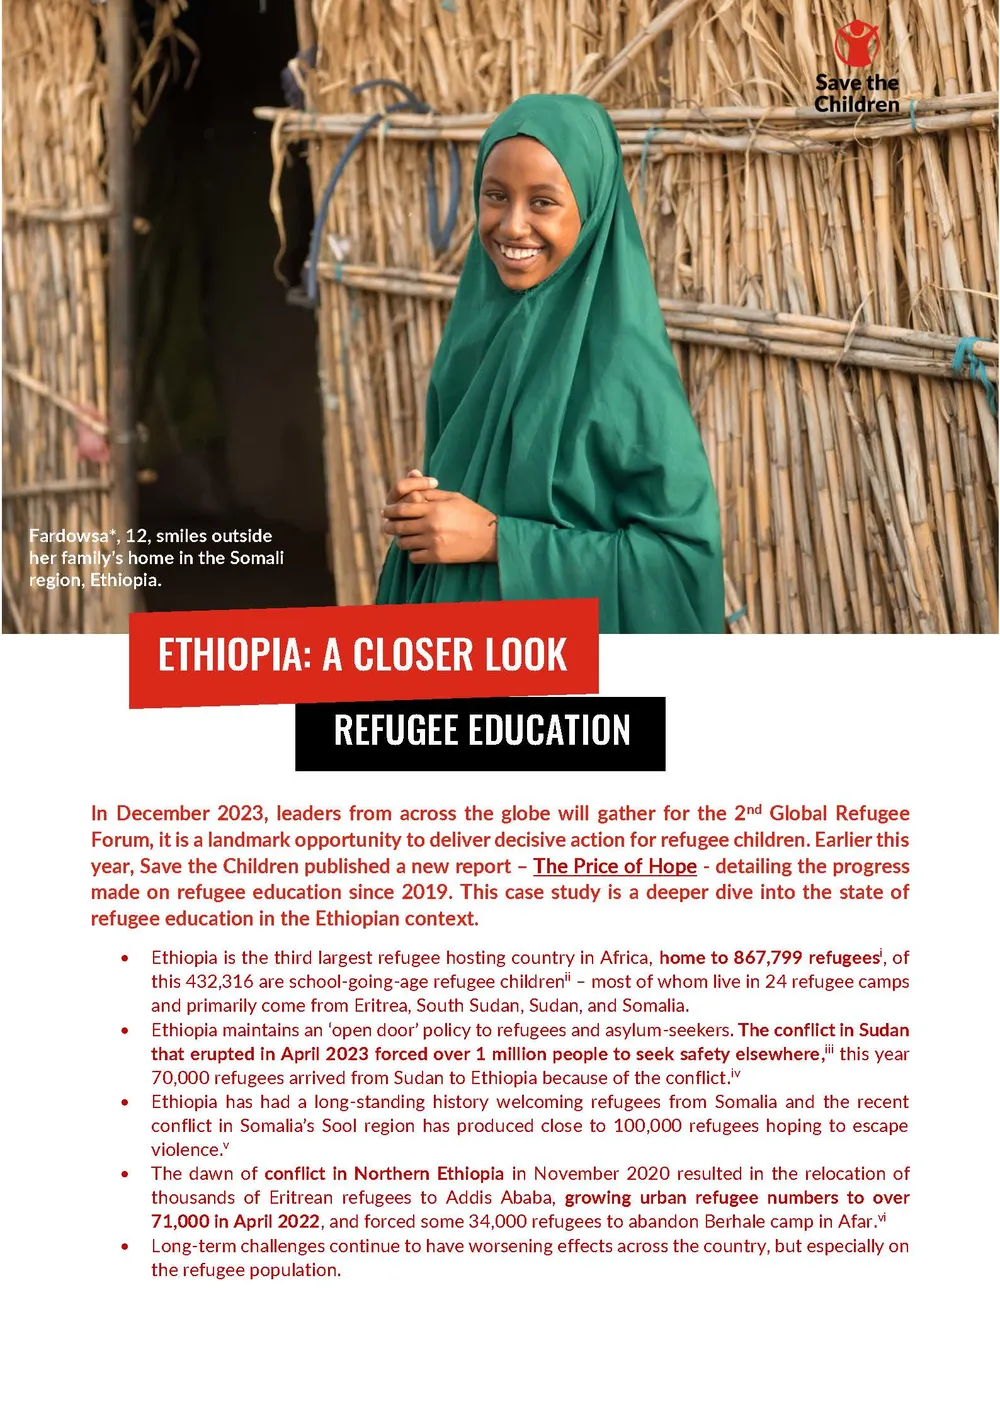 Ethiopia: A Closer look, refugee education